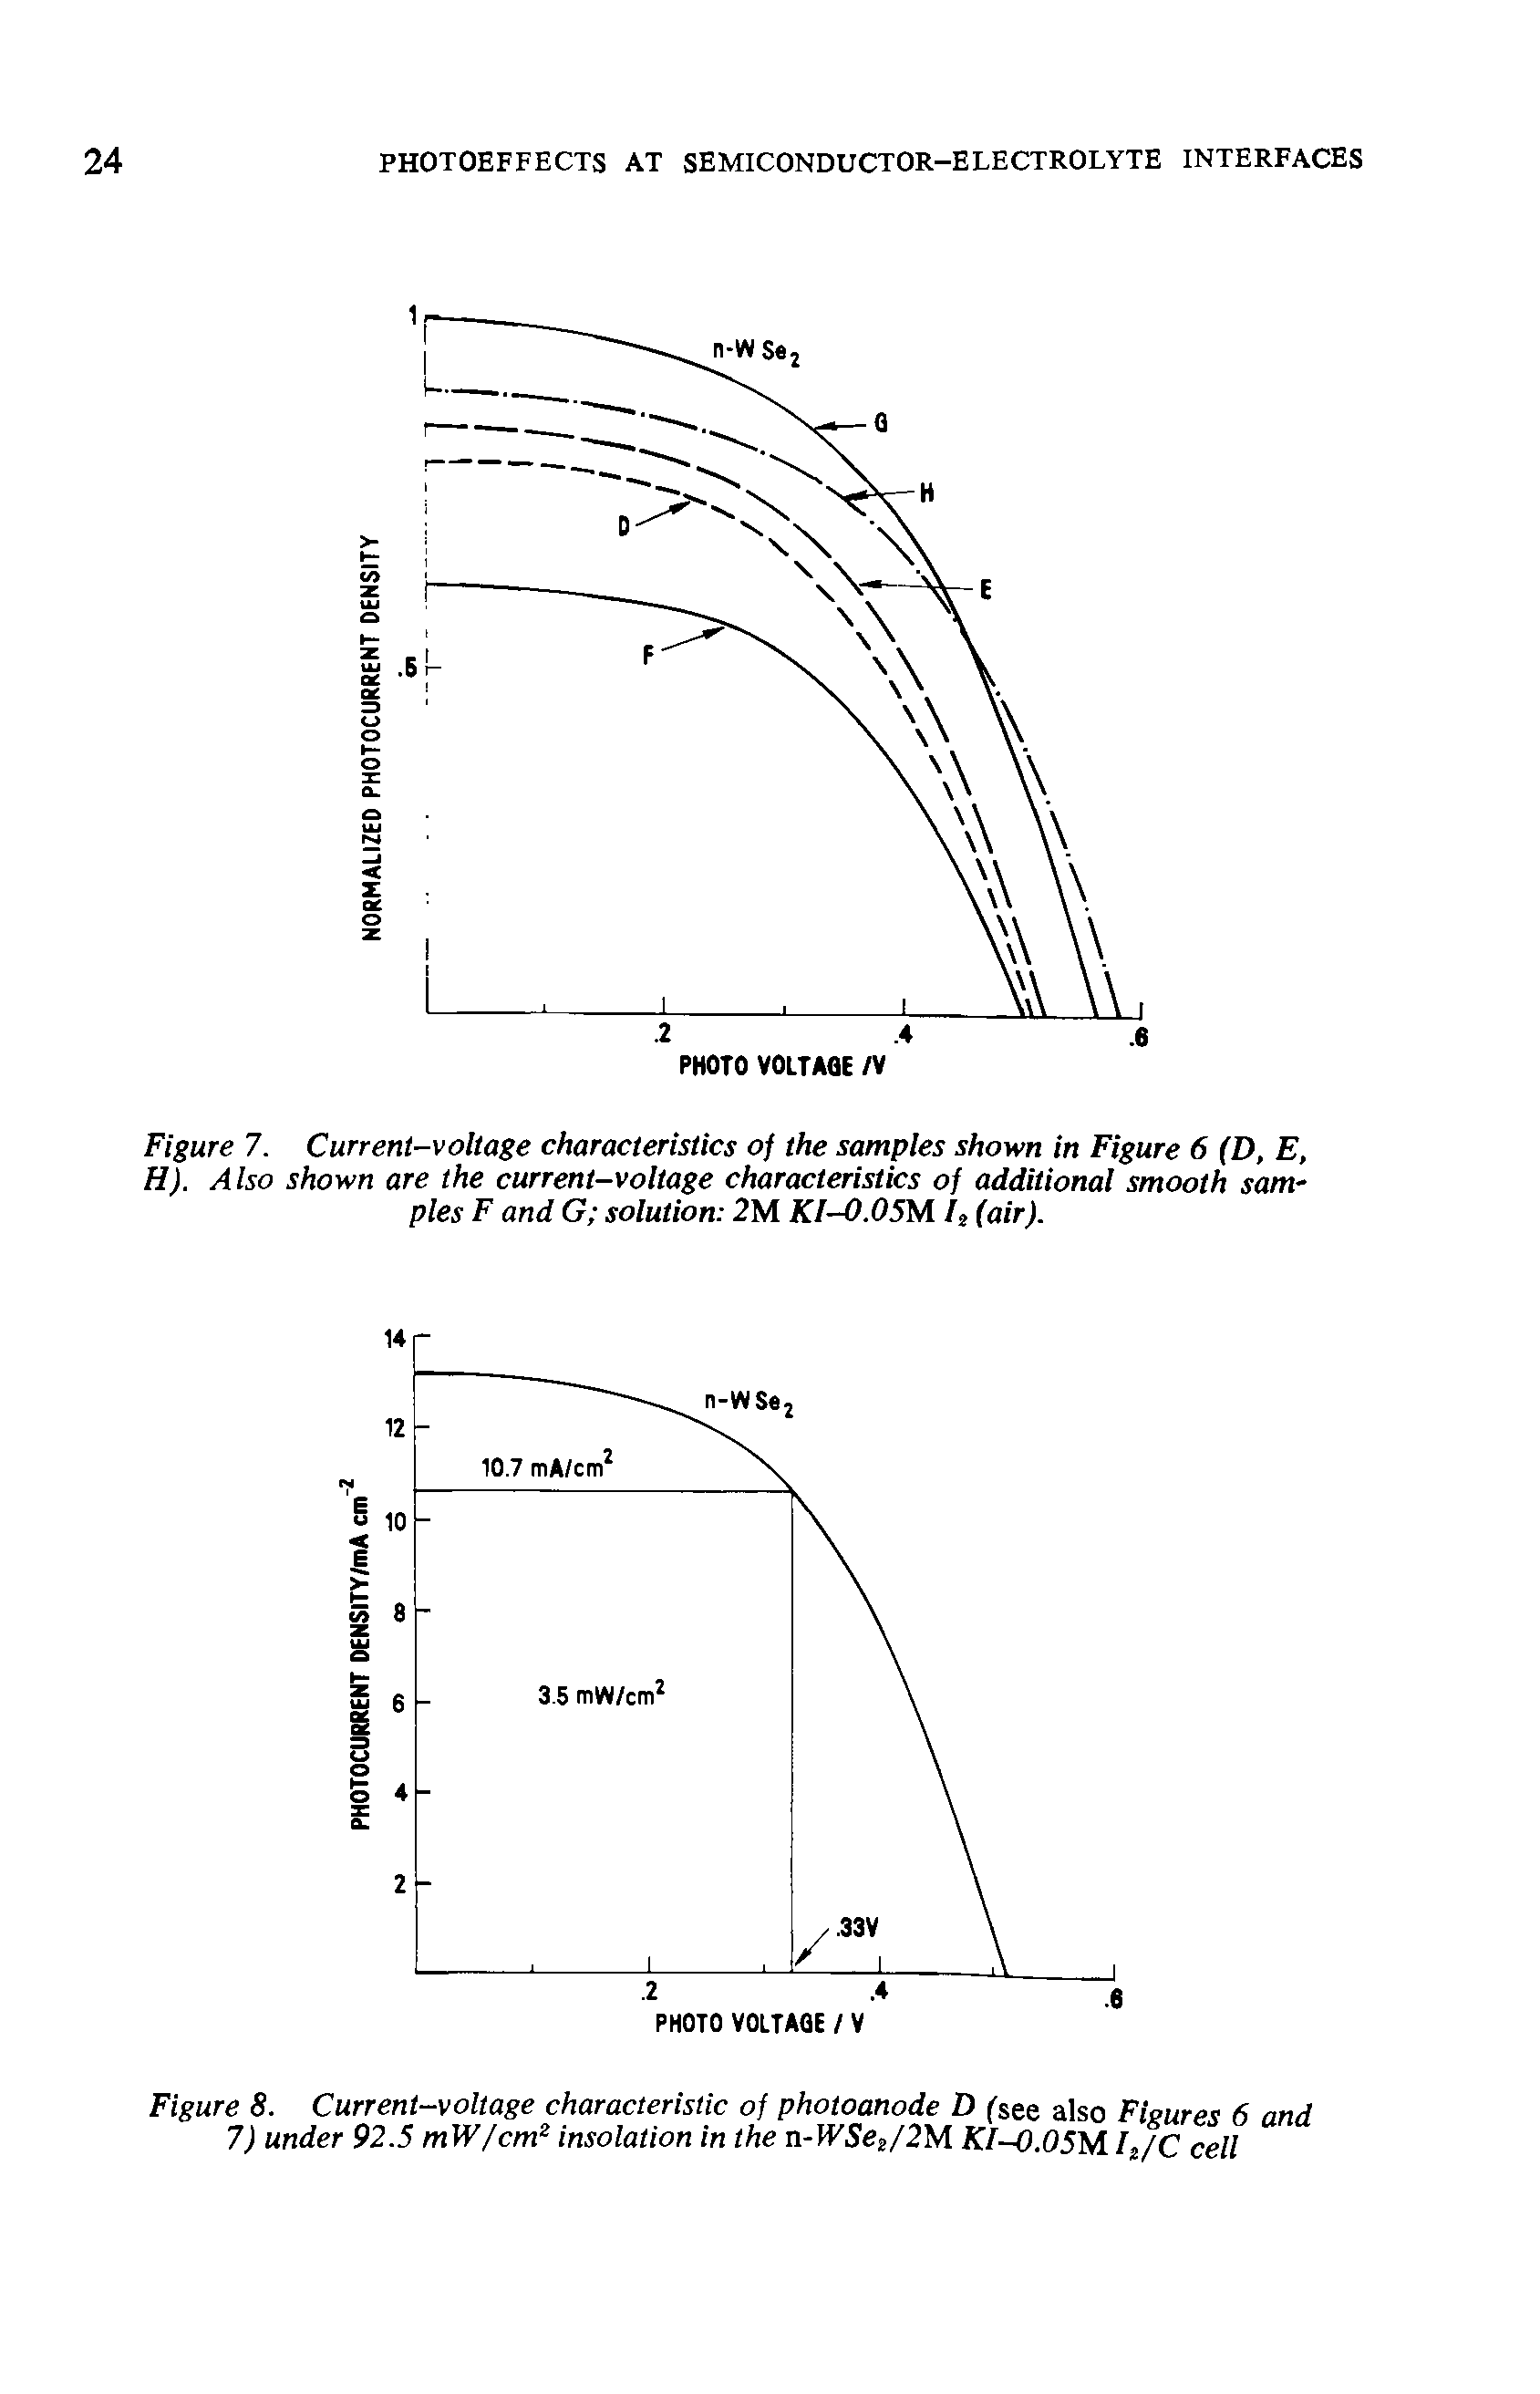 Figure 7. Current-voltage characteristics of the samples shown in Figure 6 (D, E, H). Also shown are the current-voltage characteristics of additional smooth samples F and G solution 2M KI-0.05M /2 (air).